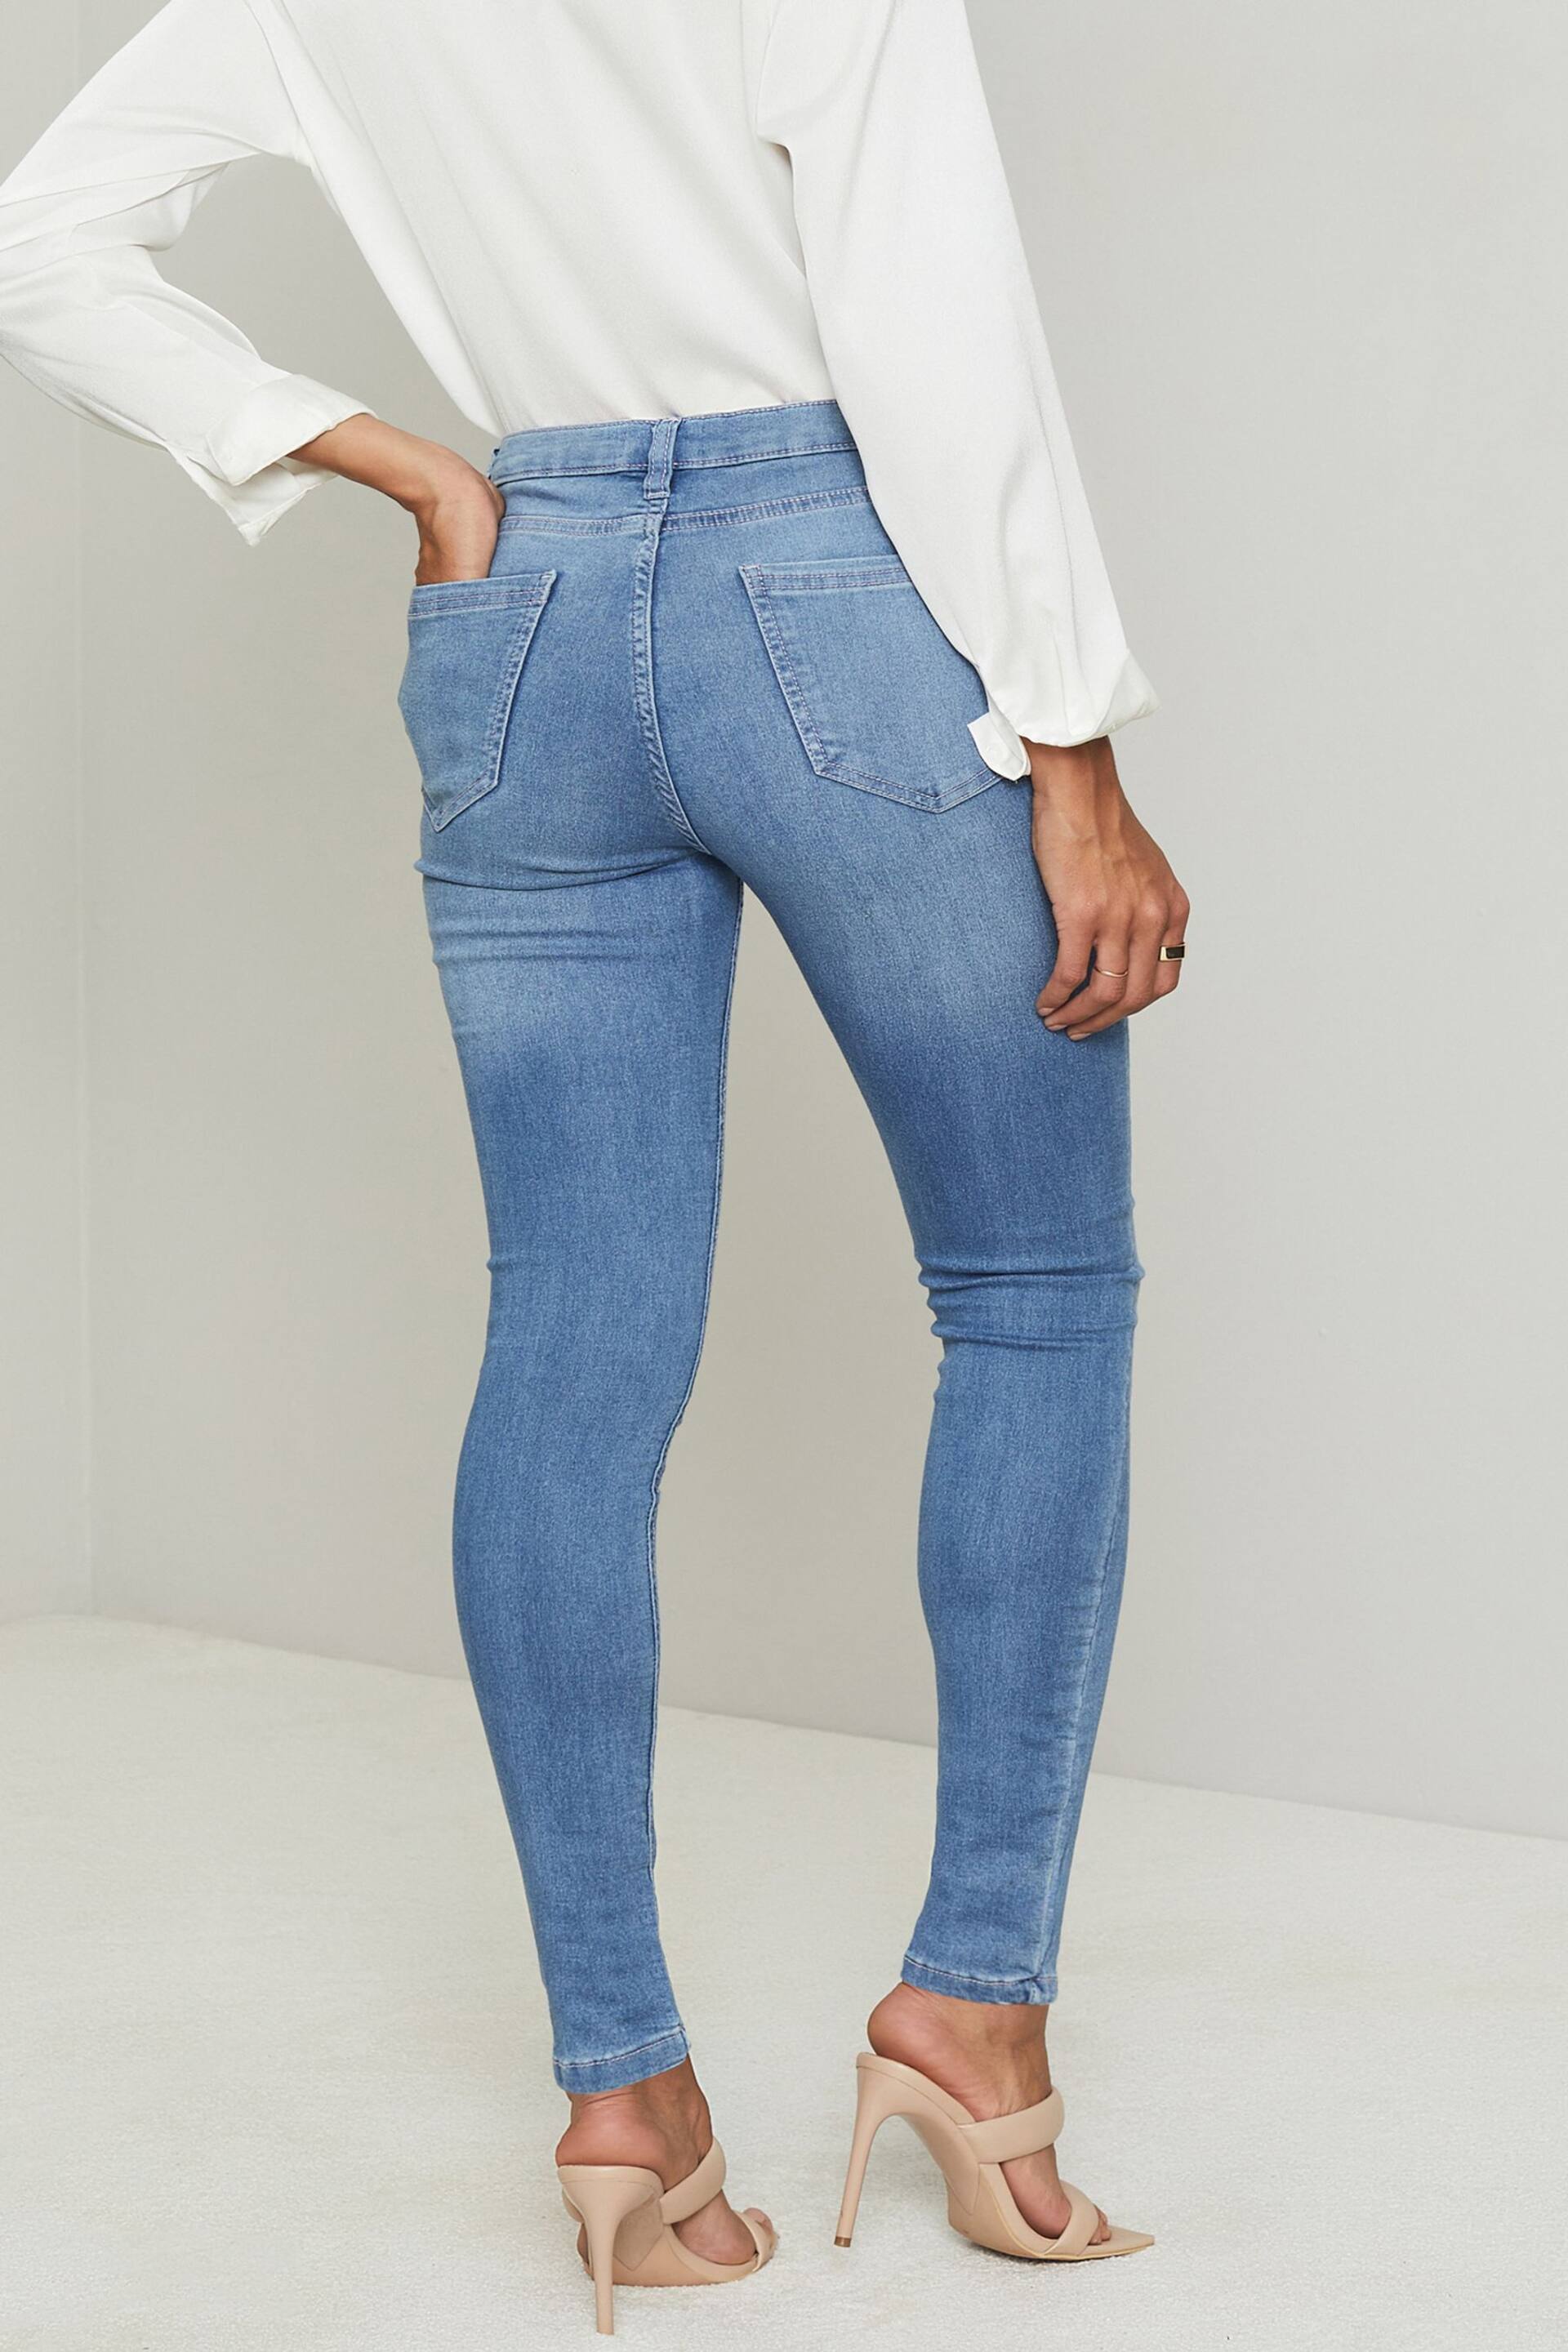 Lipsy Blue Petite Mid Rise Stretch Skinny Jeans - Image 2 of 4